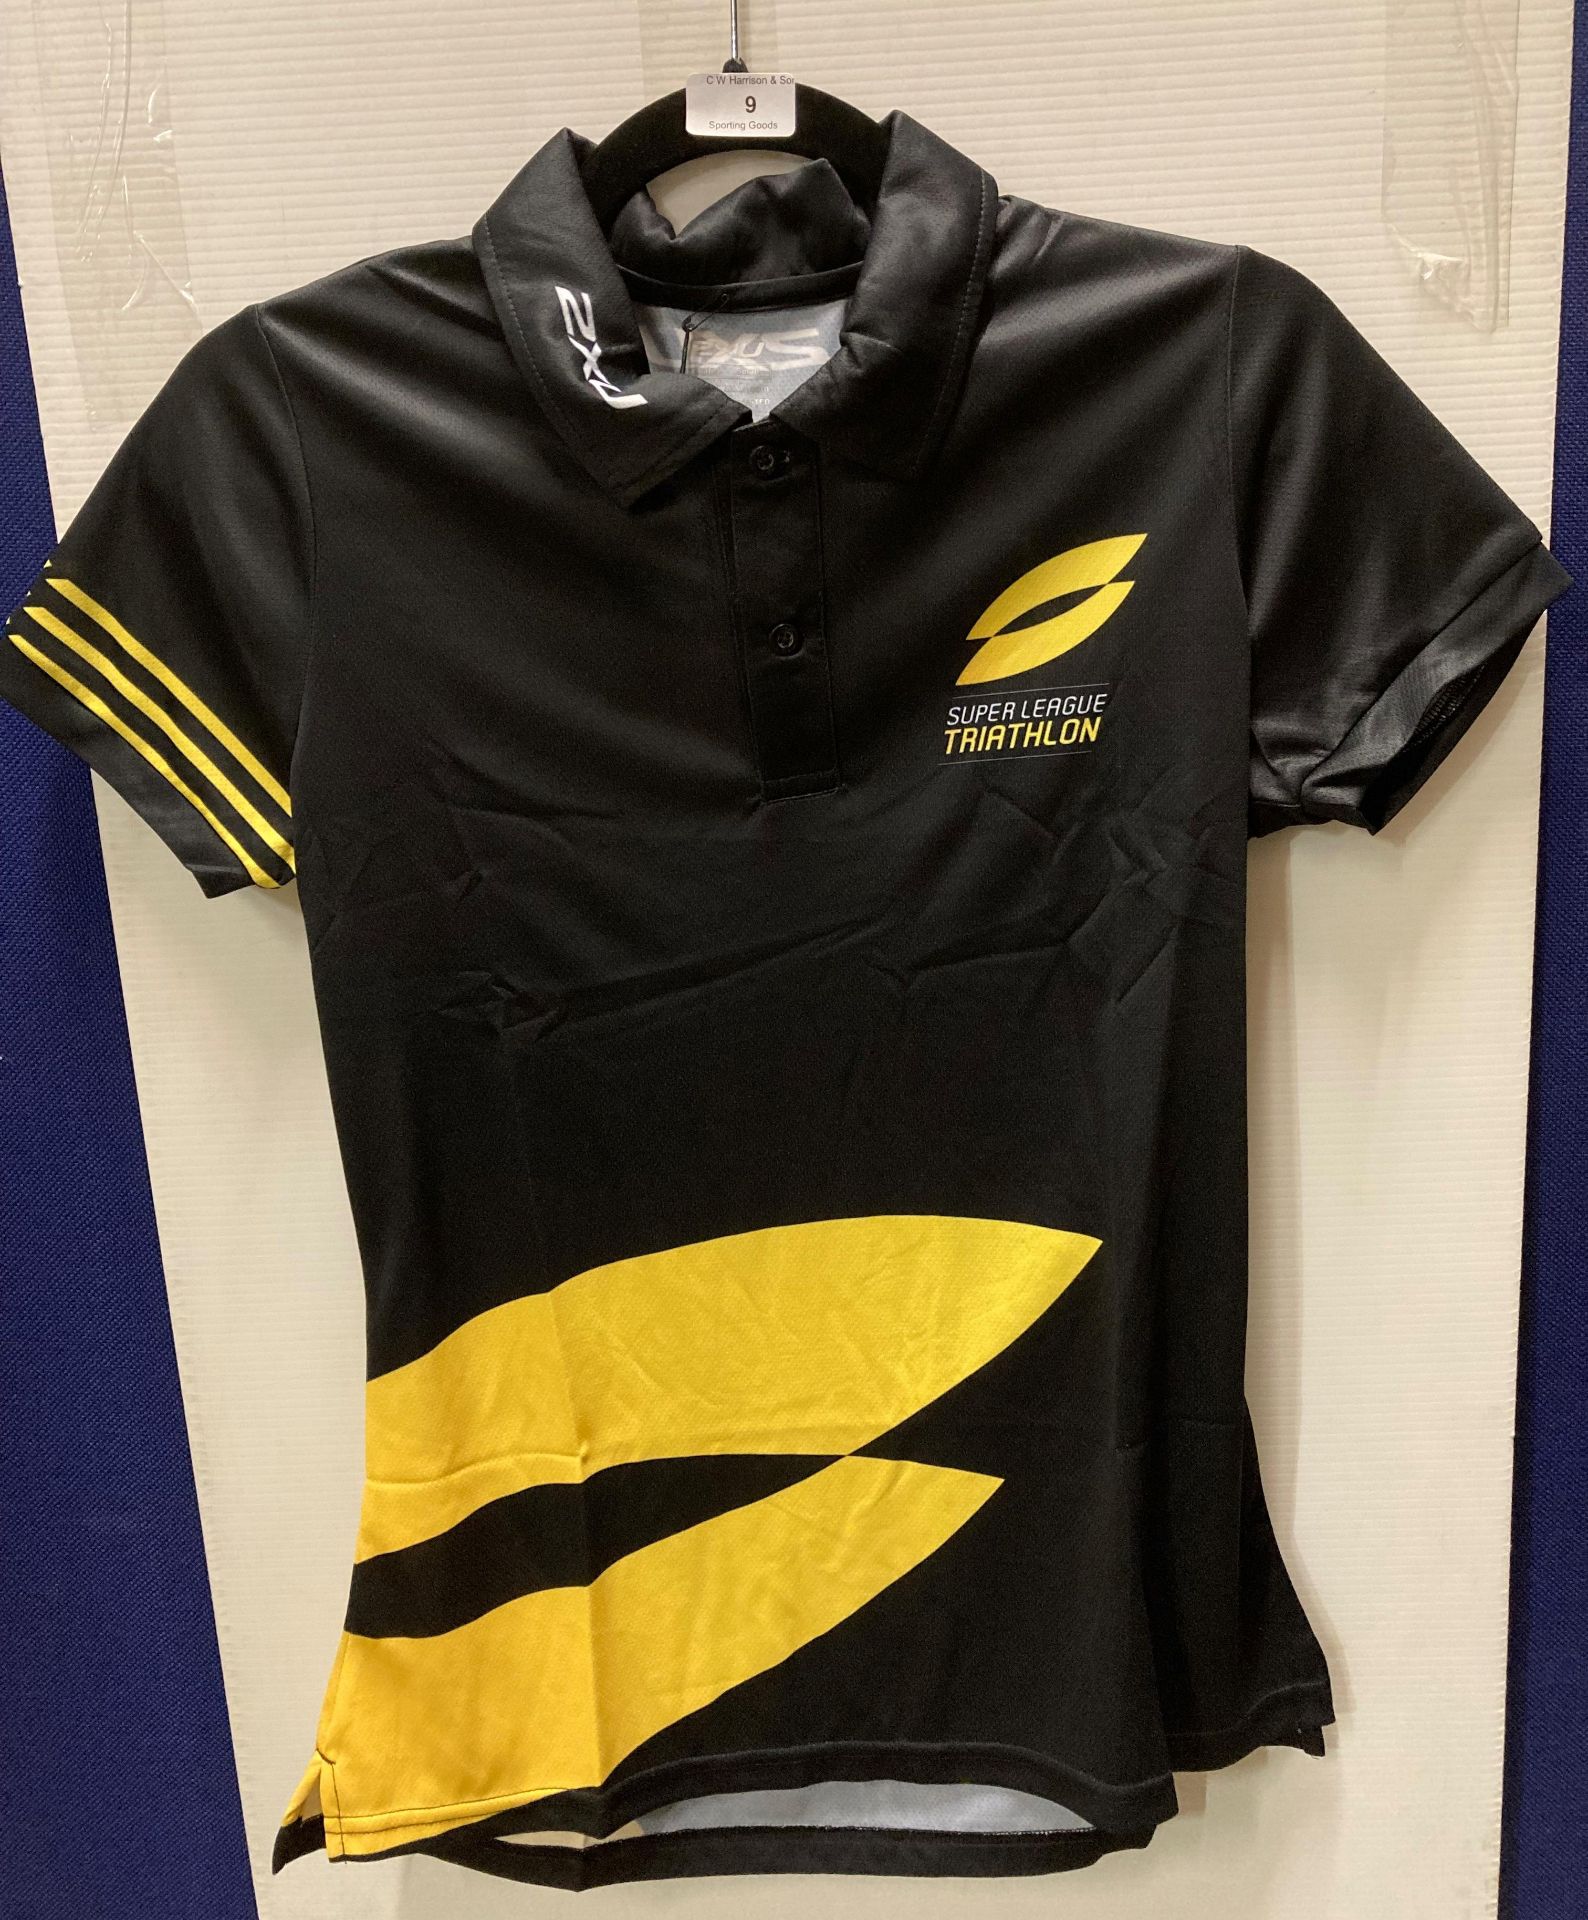 30 x ladies 2XU Super League Triathlon polo shirts (size S) (please note - crate is property of CWH